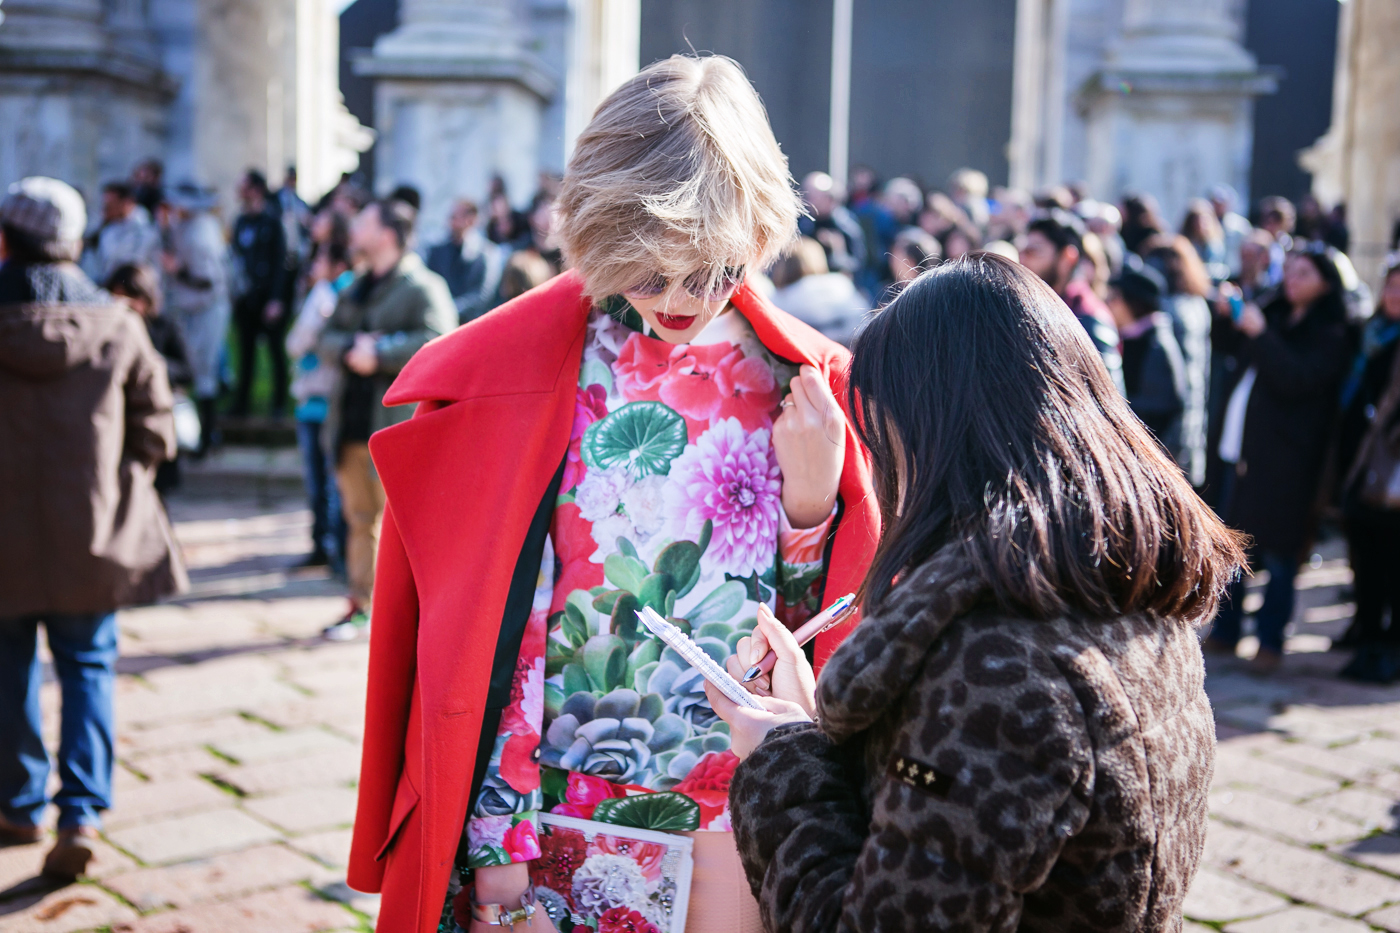 thecablook darya kamalova russian italian fashion blogger blonde short hair pixie cut street style whats inside you by eleonora carisi outfit asos long red coat steven heels shopbop milan fashion week aw14 15 arco della pace just cavalli-20 copy